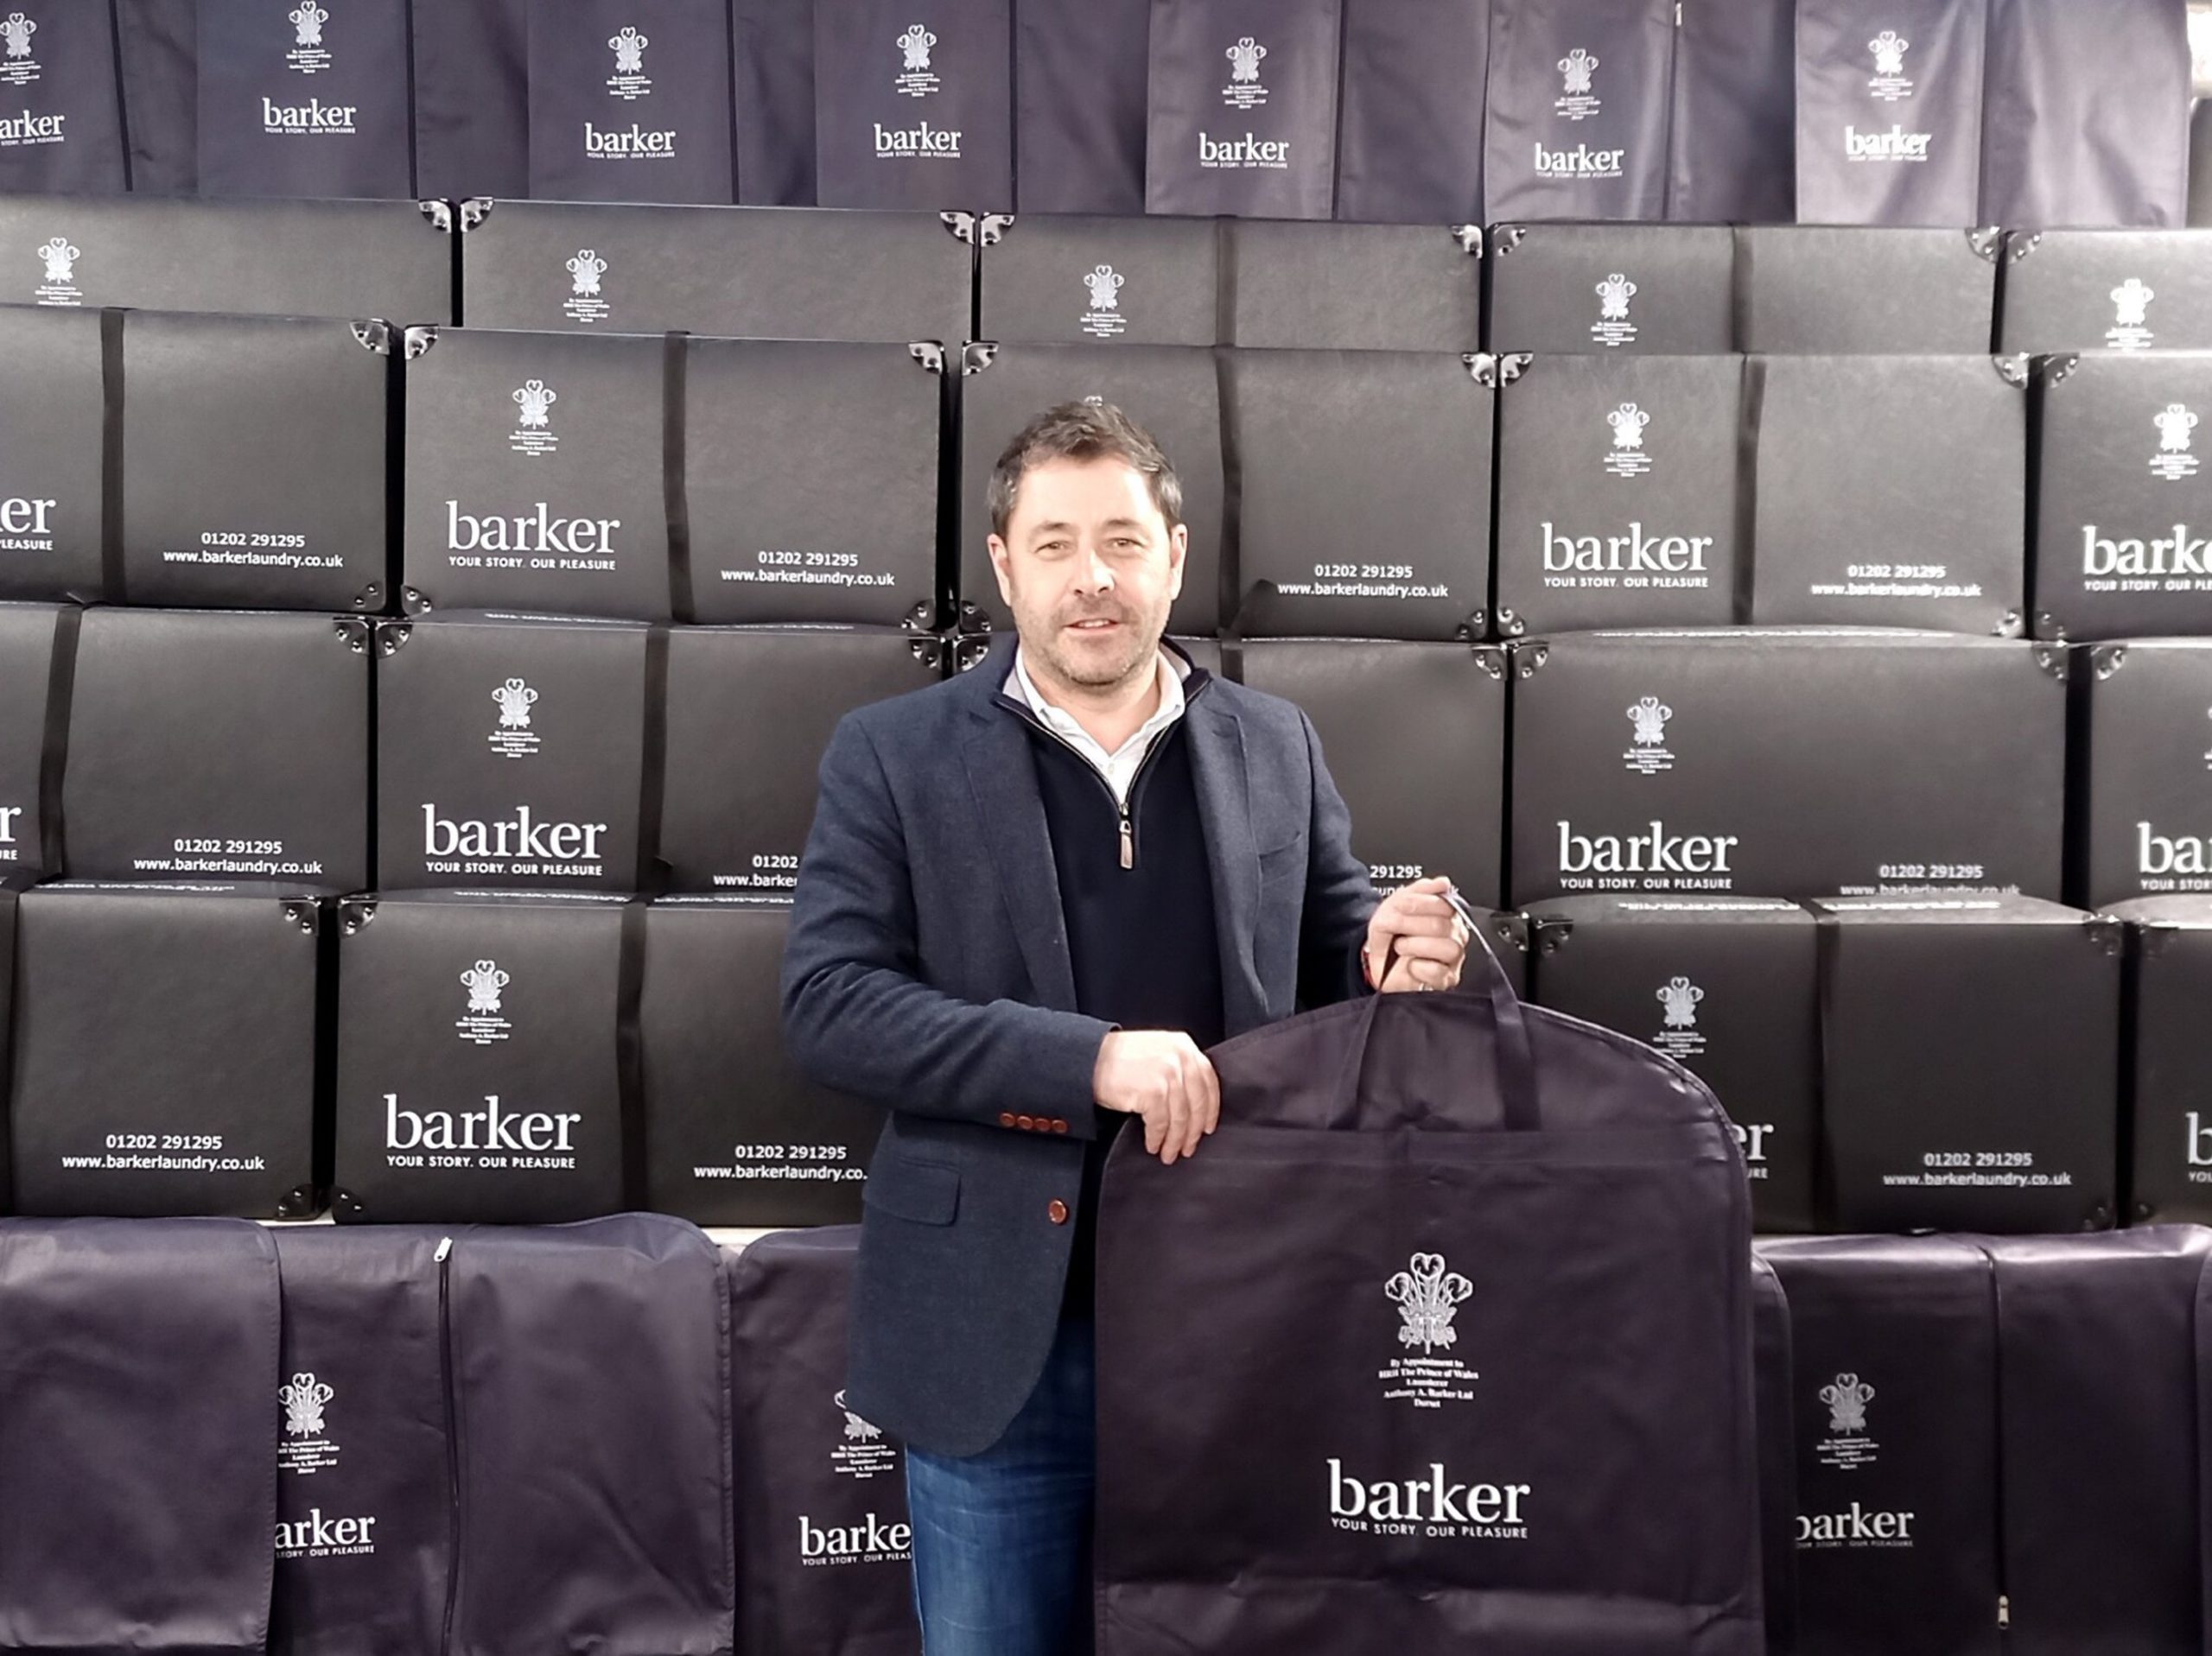 Eco ambitions achieved by Barker Dry Cleaning & Laundry – Reducing use of ‘single use’ plastic by 90%